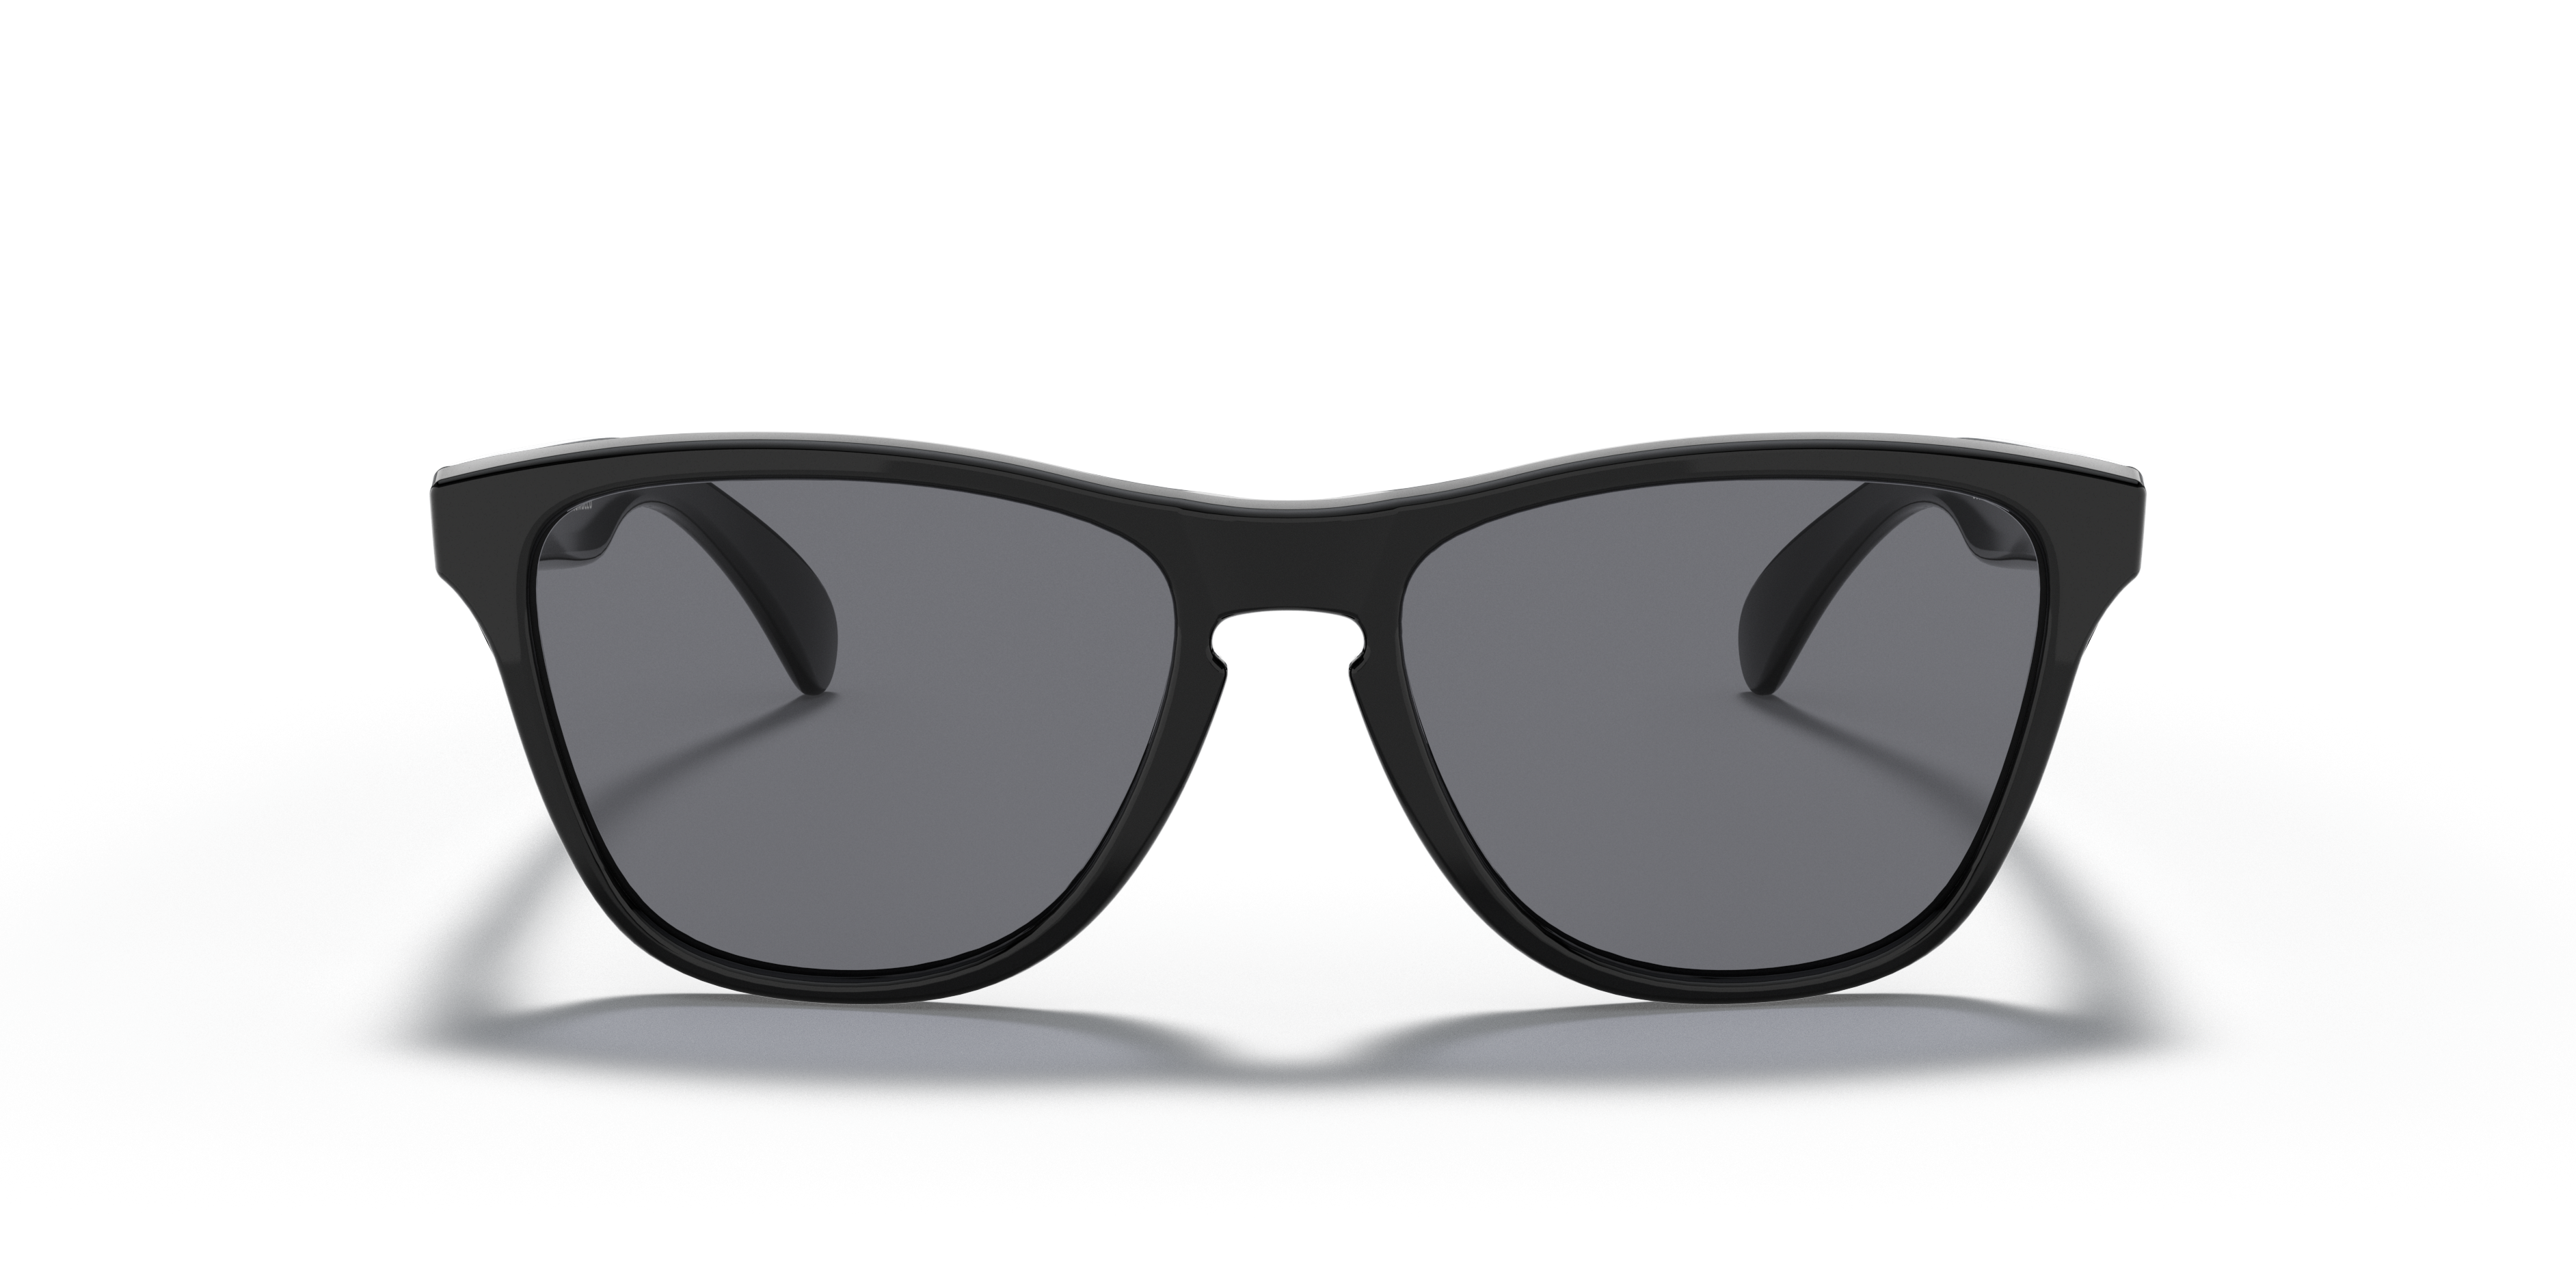 Frogskins™ XS (Youth Fit) Polished 